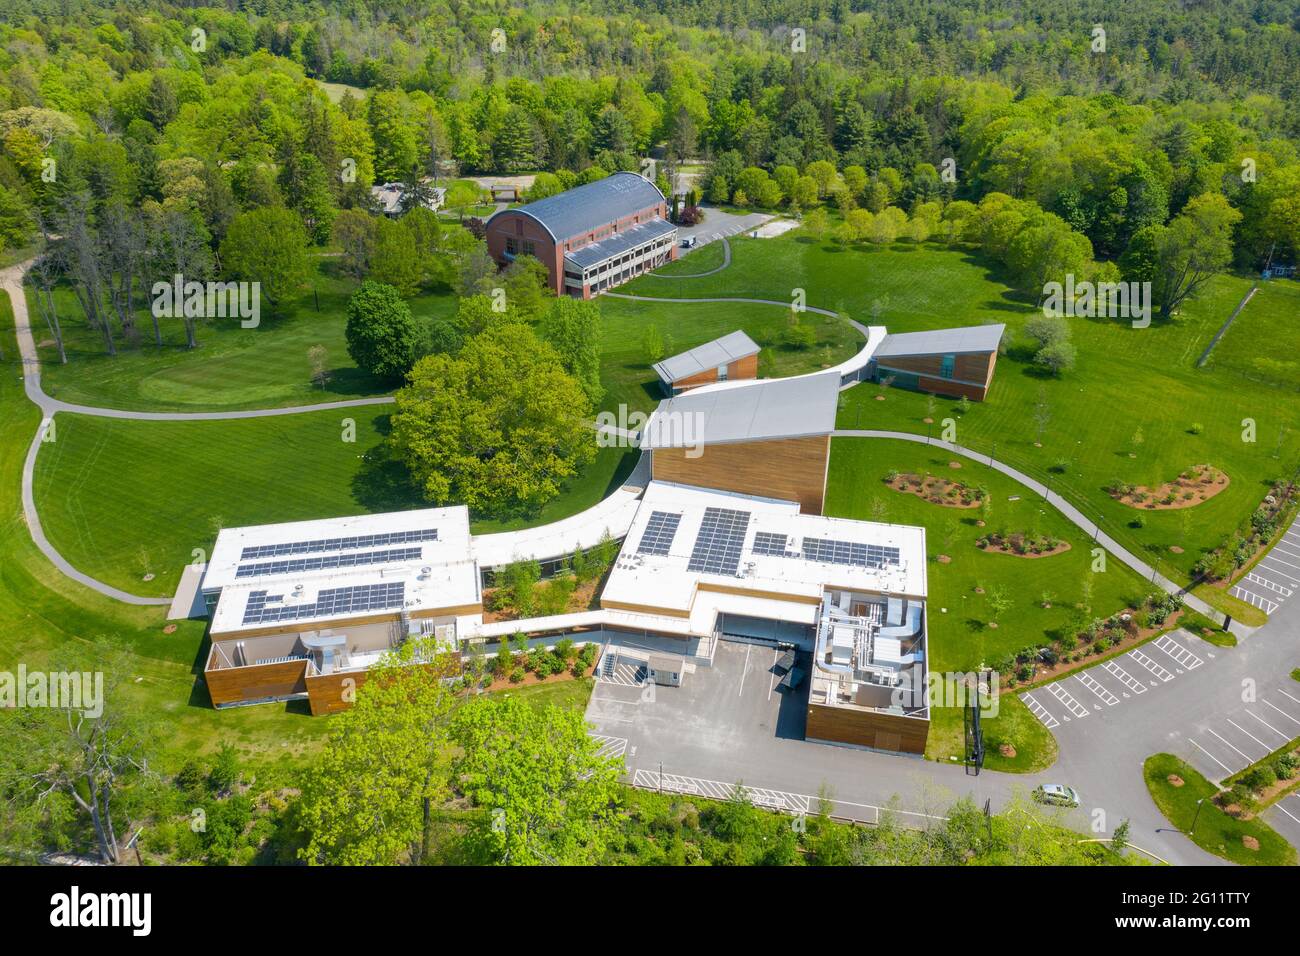 Linde Center for Music and Learning, Tanglewood, Boston Symphony Orchestra, Lenox, Massachusetts Stockfoto